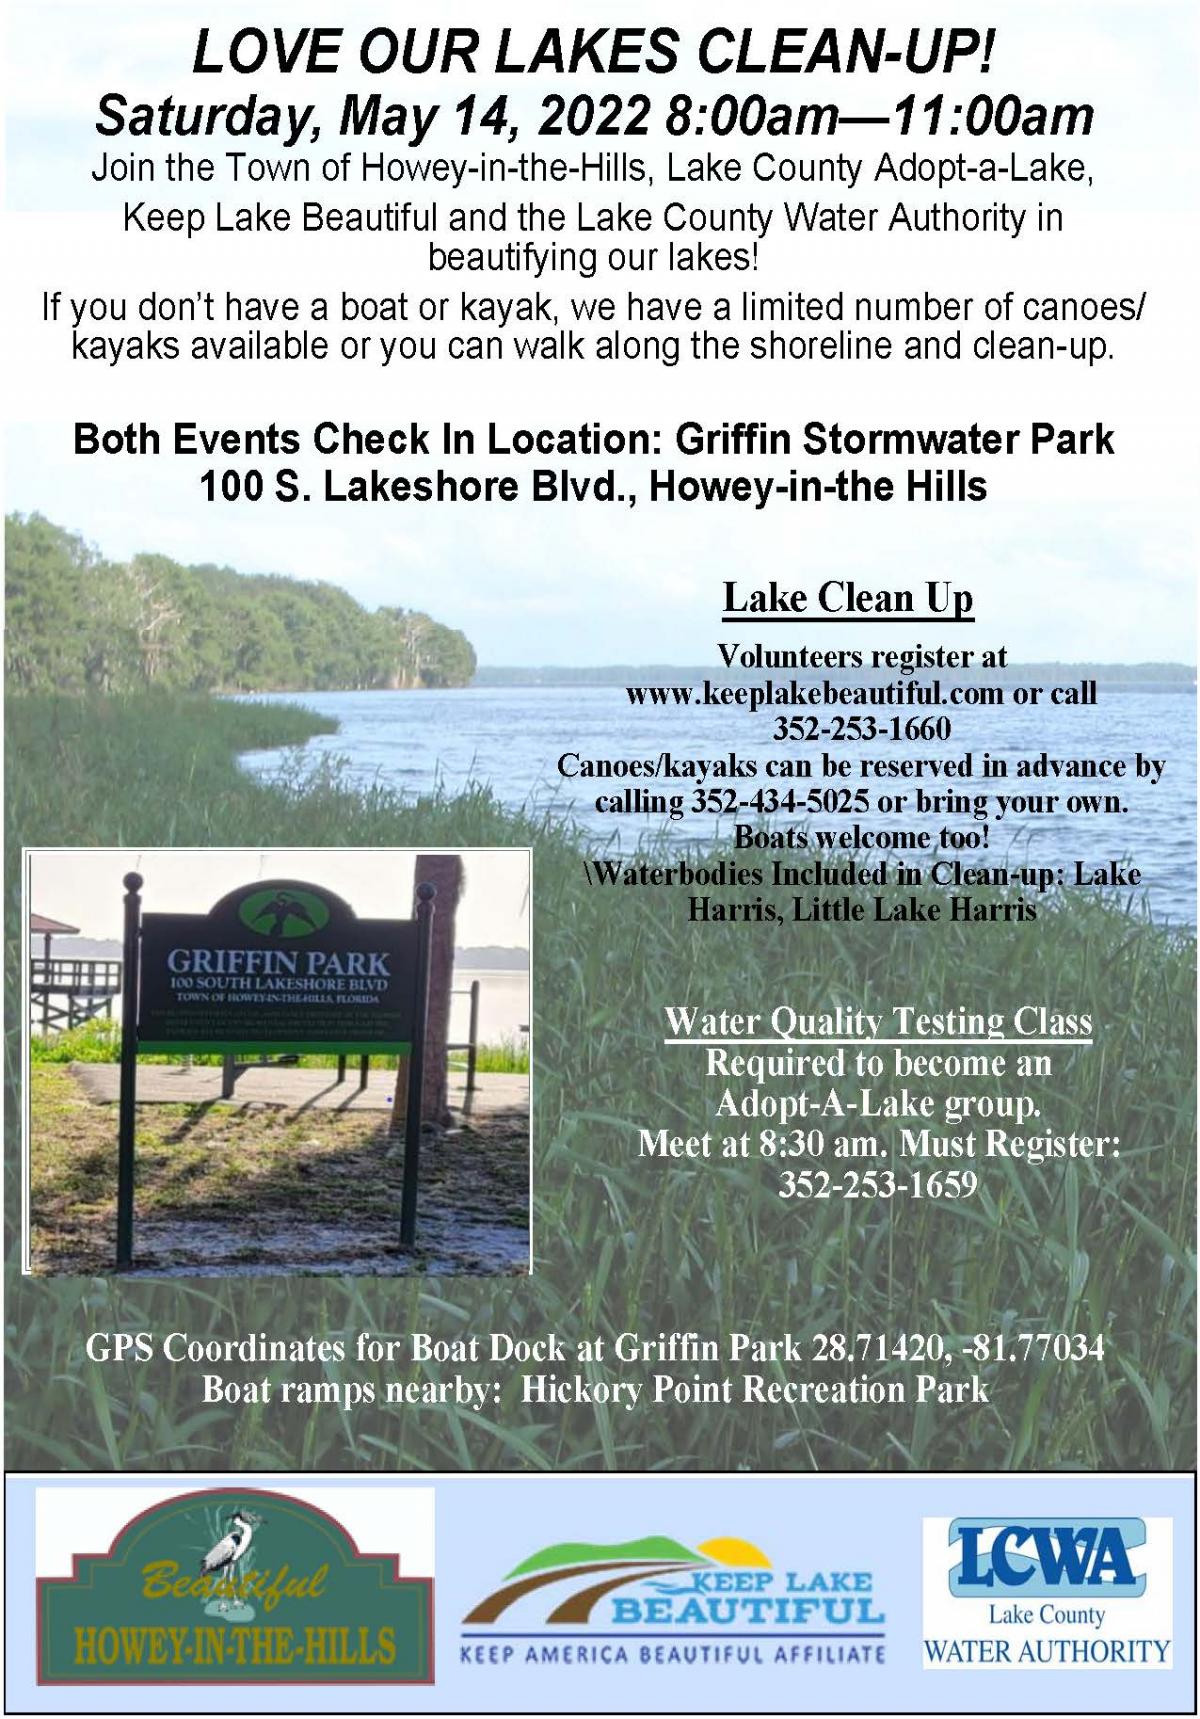 Love Our Lakes cleanup event flier